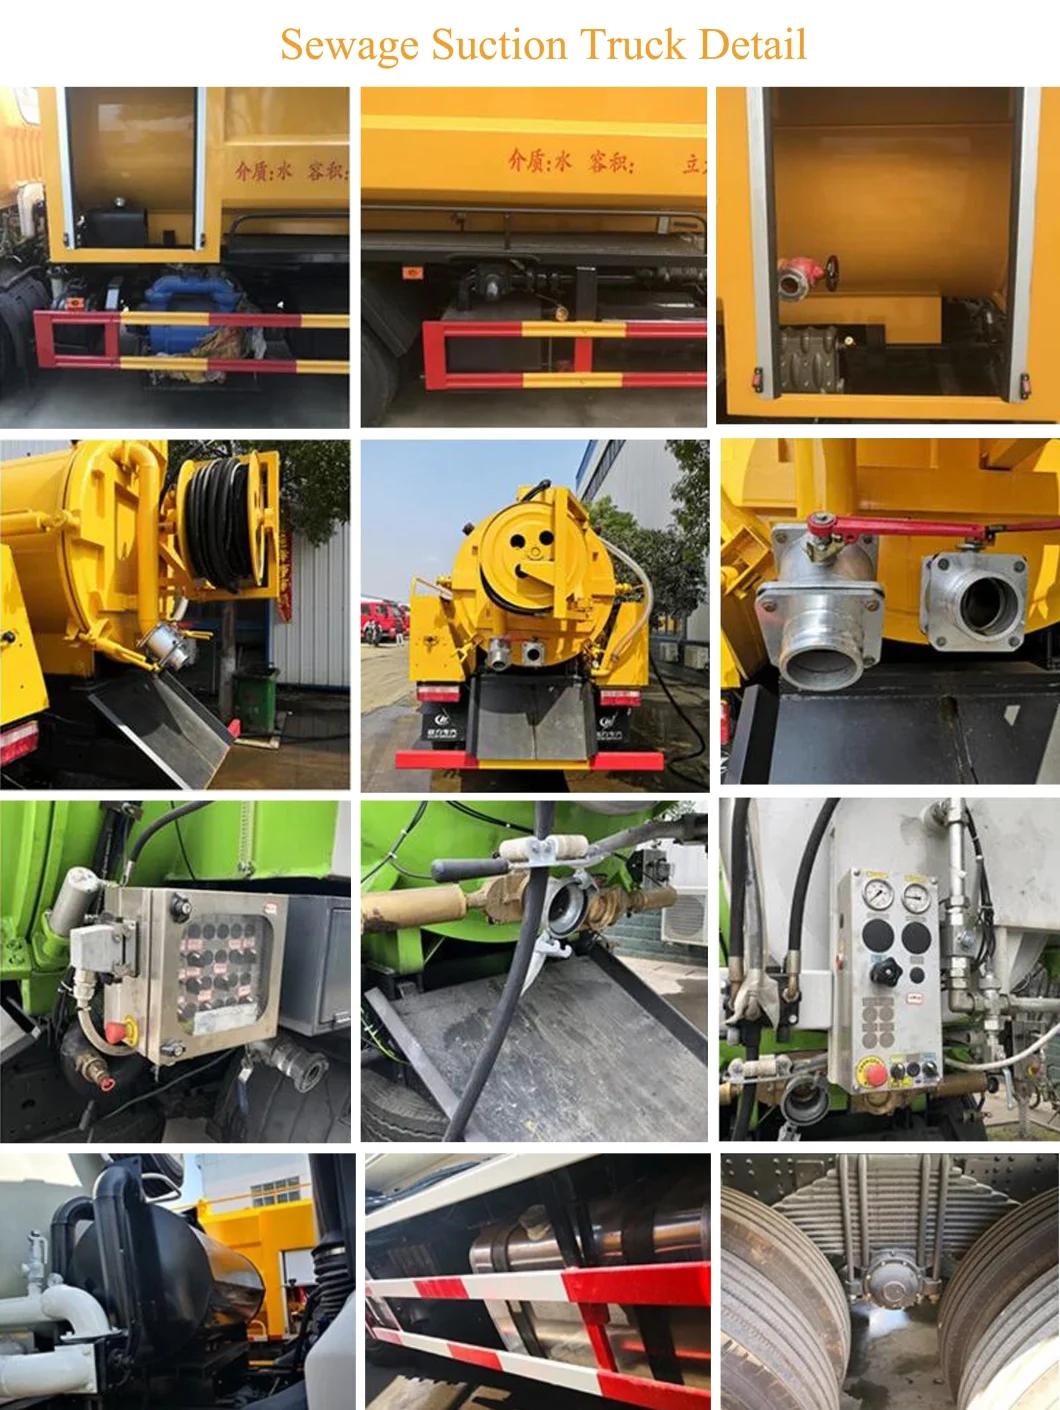 8000 Liters Waste Vacuum Septic Suction Tank Truck Sewage Cesspool Cleaning Truck High Pressure Jetting Vacuum Sewer Sludge Cleaning Sewage Suction Tank Truck